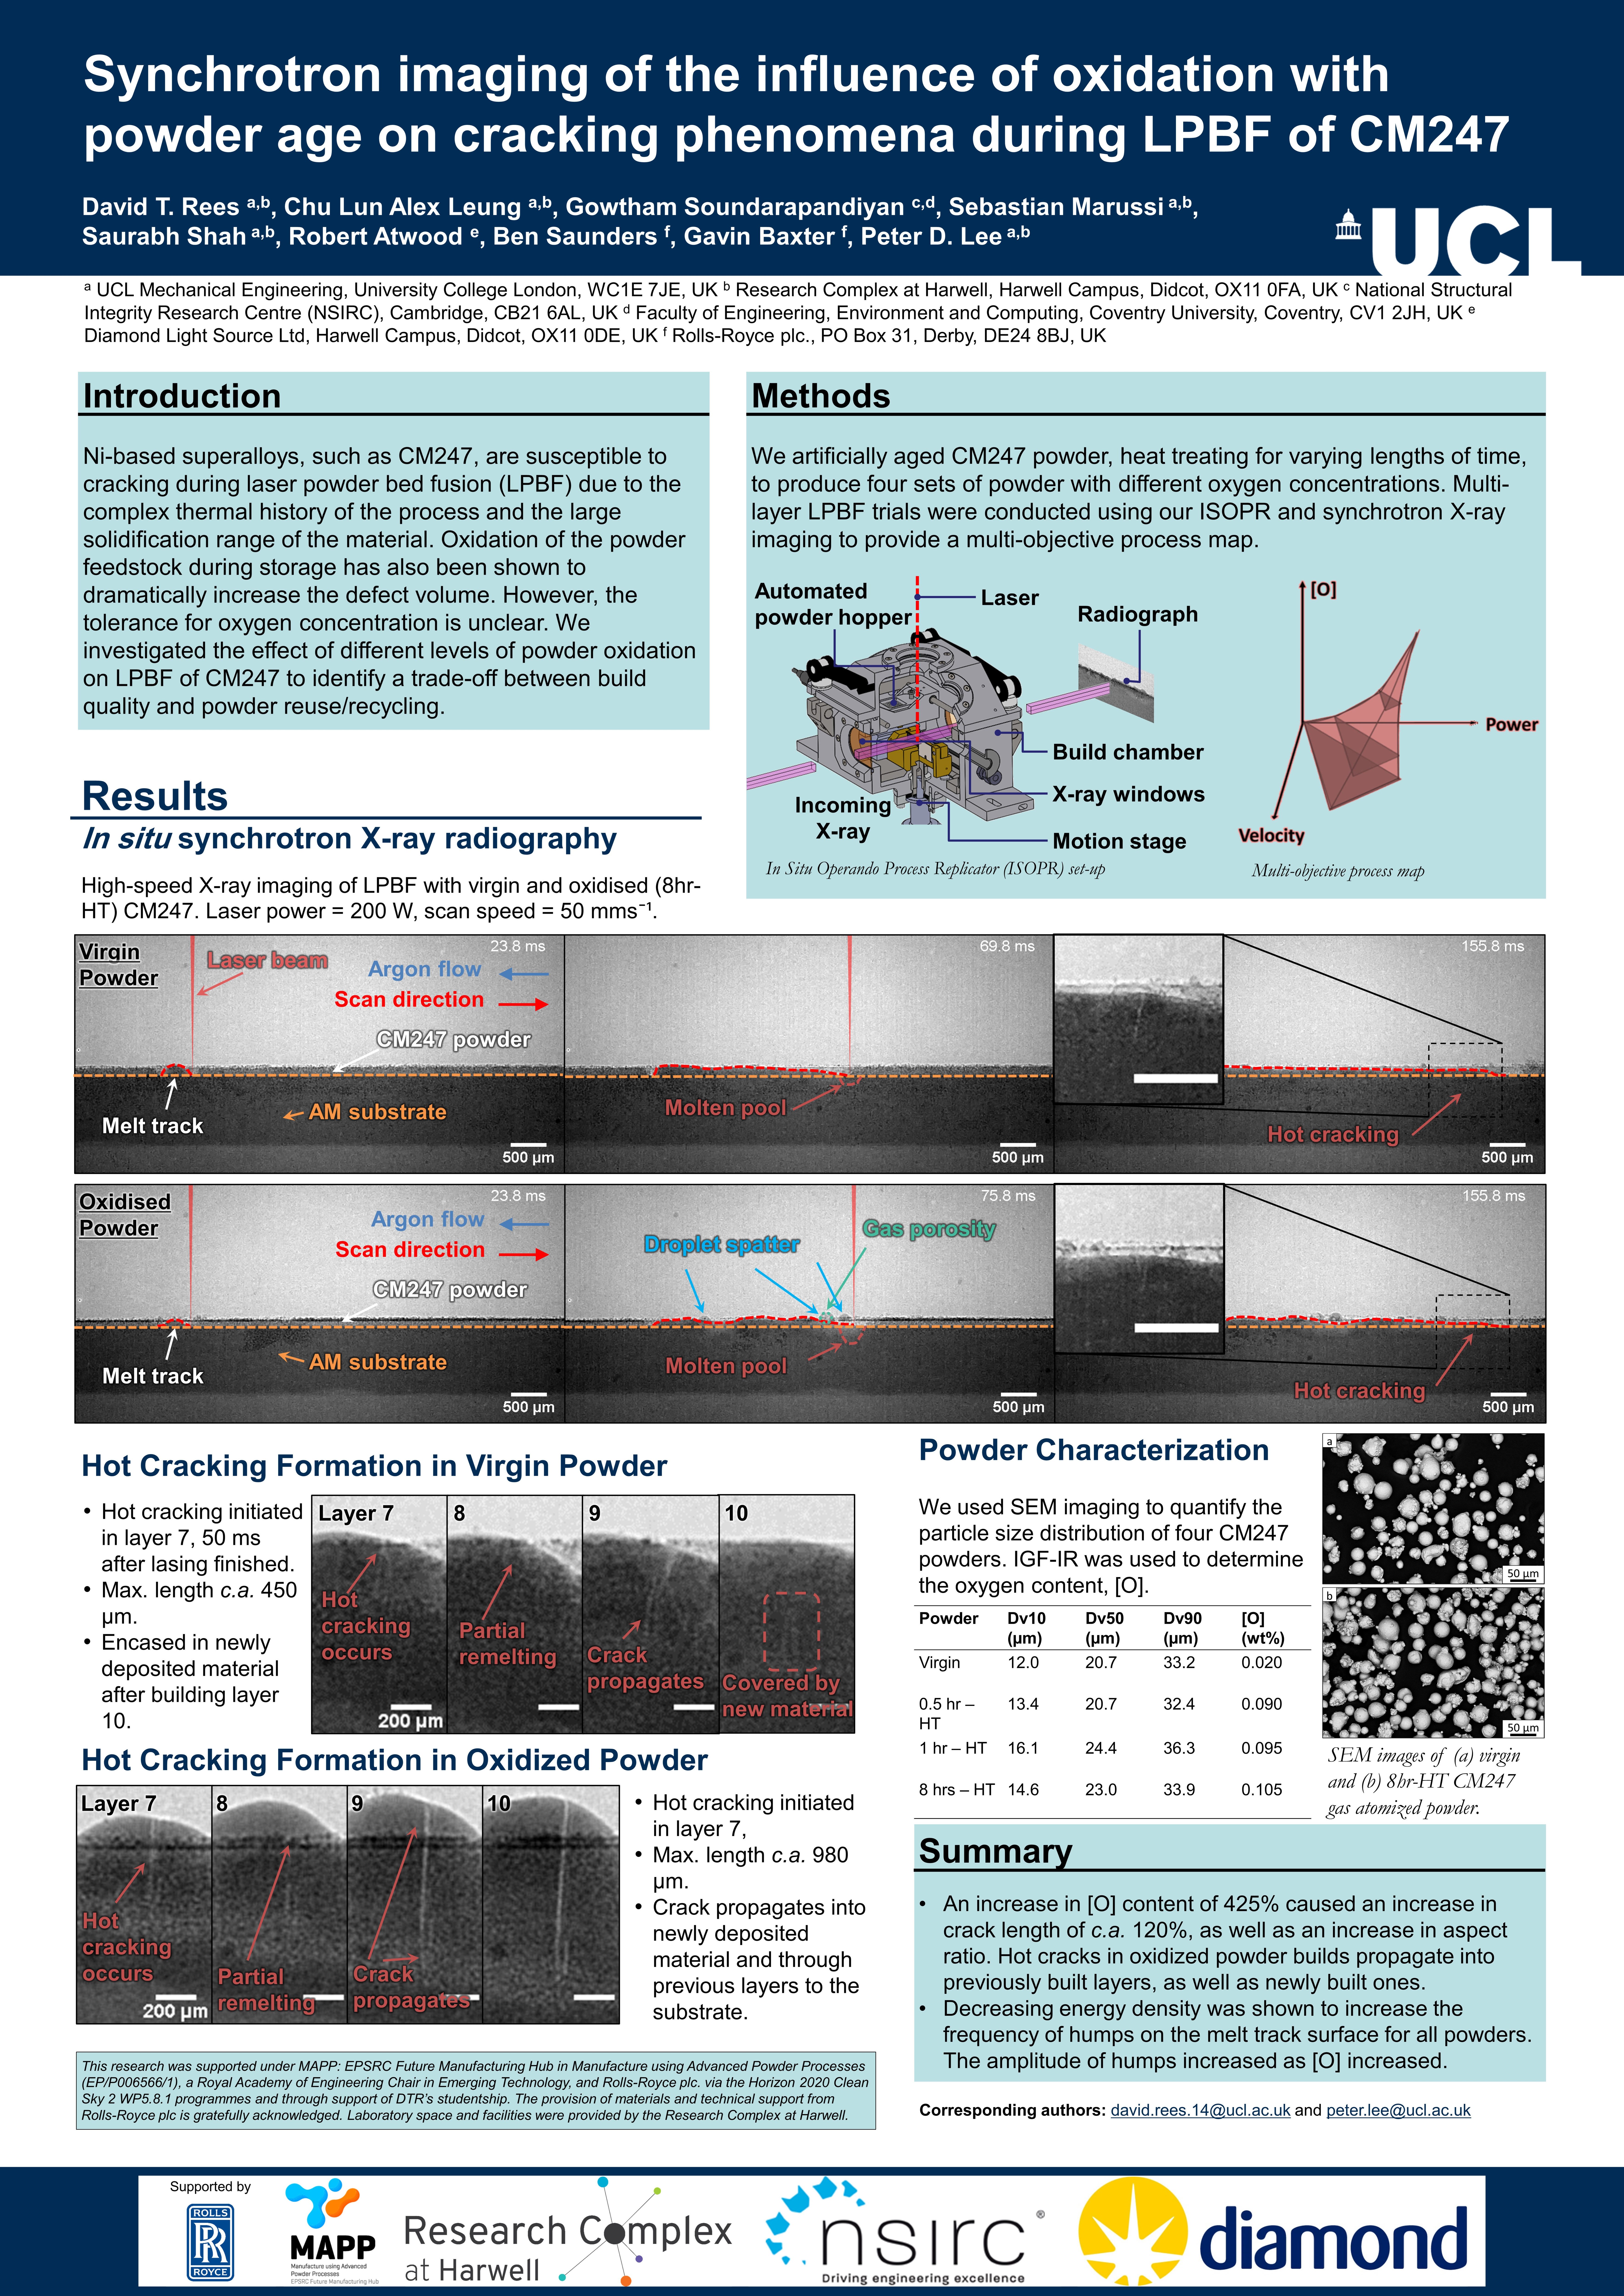 David Rees' poster for the UCL Mechanical Engineering PhD conference - David Rees' poster for the UCL Mechanical Engineering PhD conference representing his work investigating how oxygen affects hot cracking in laser powder bed fusion of nickel superalloys using synchrotron X-ray imaging